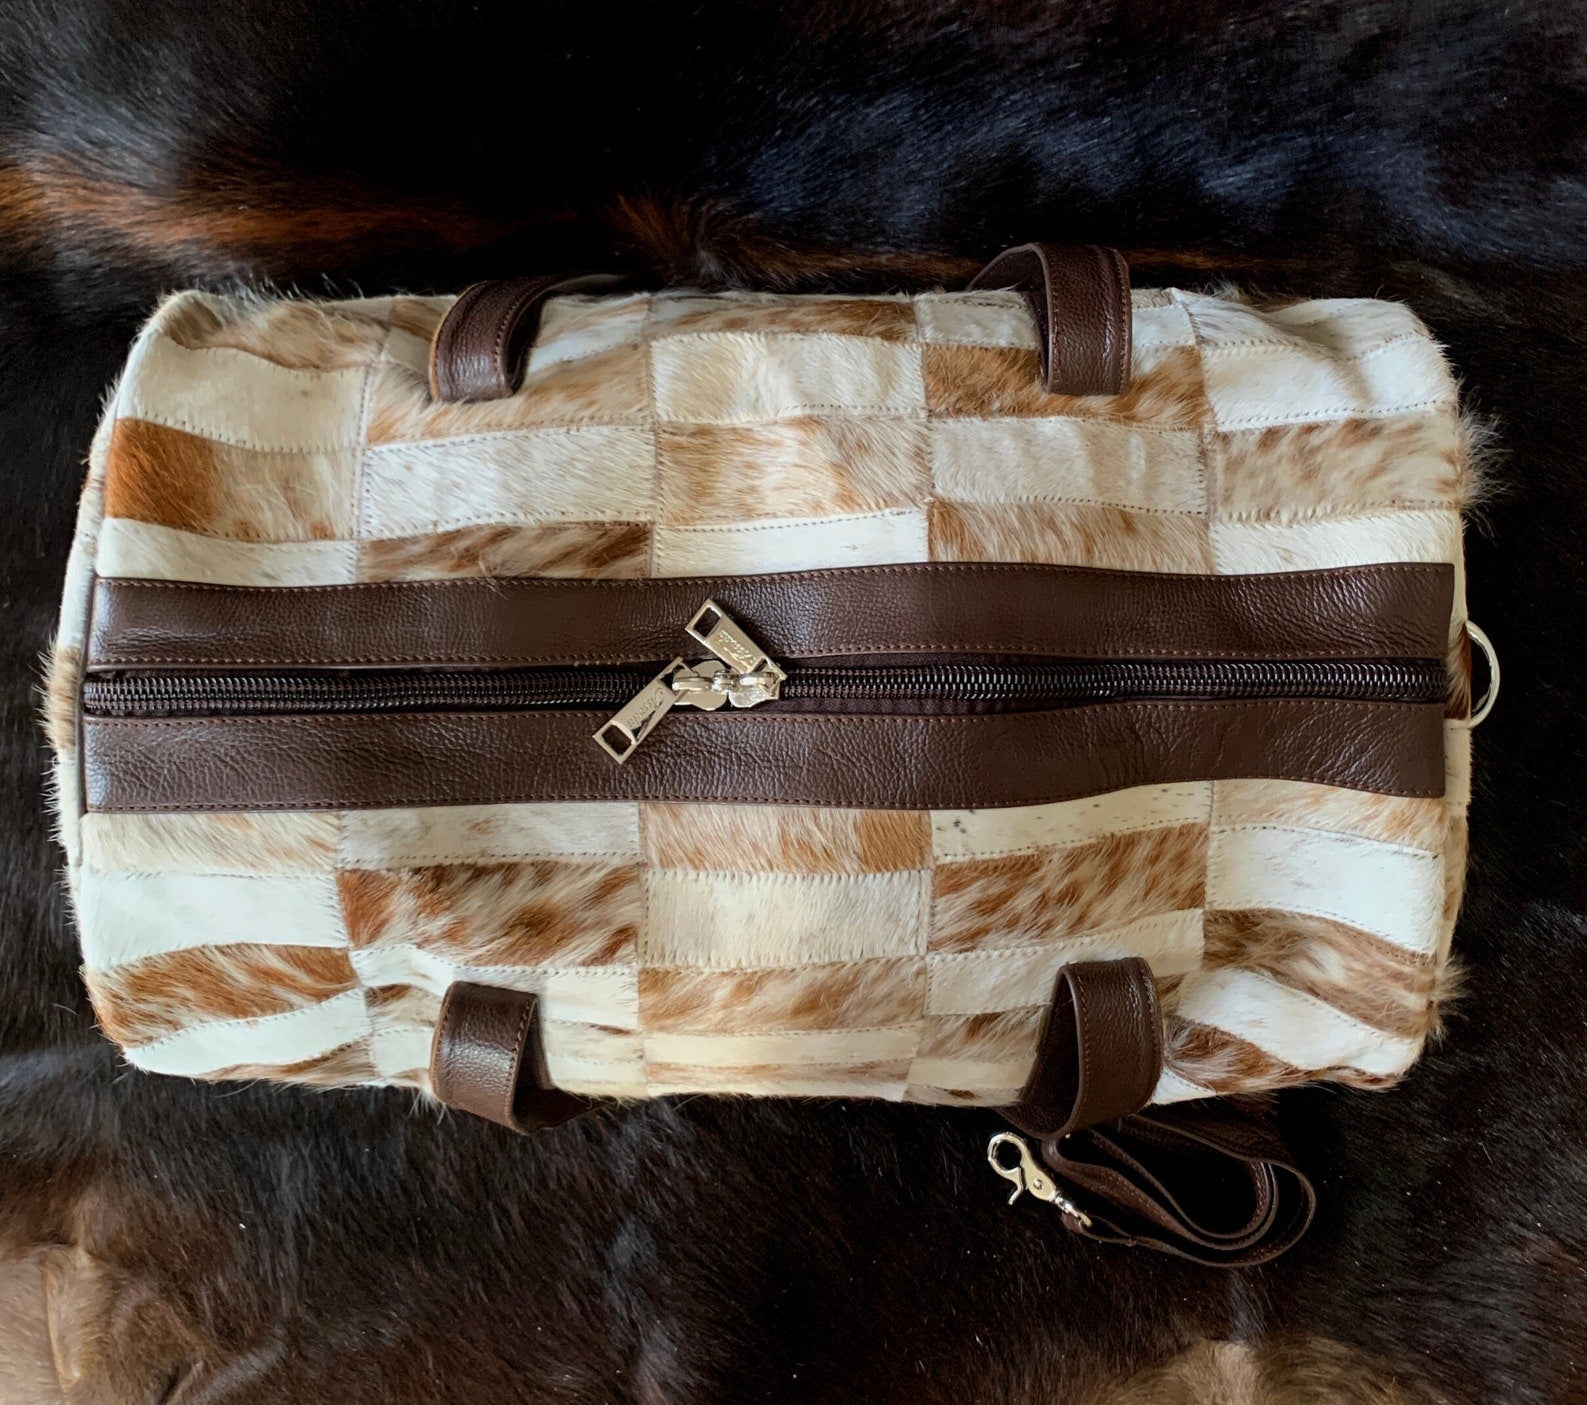 Hit the gym in fashion-forward style with this cow skin gym bag, blending functionality with urban sophistication